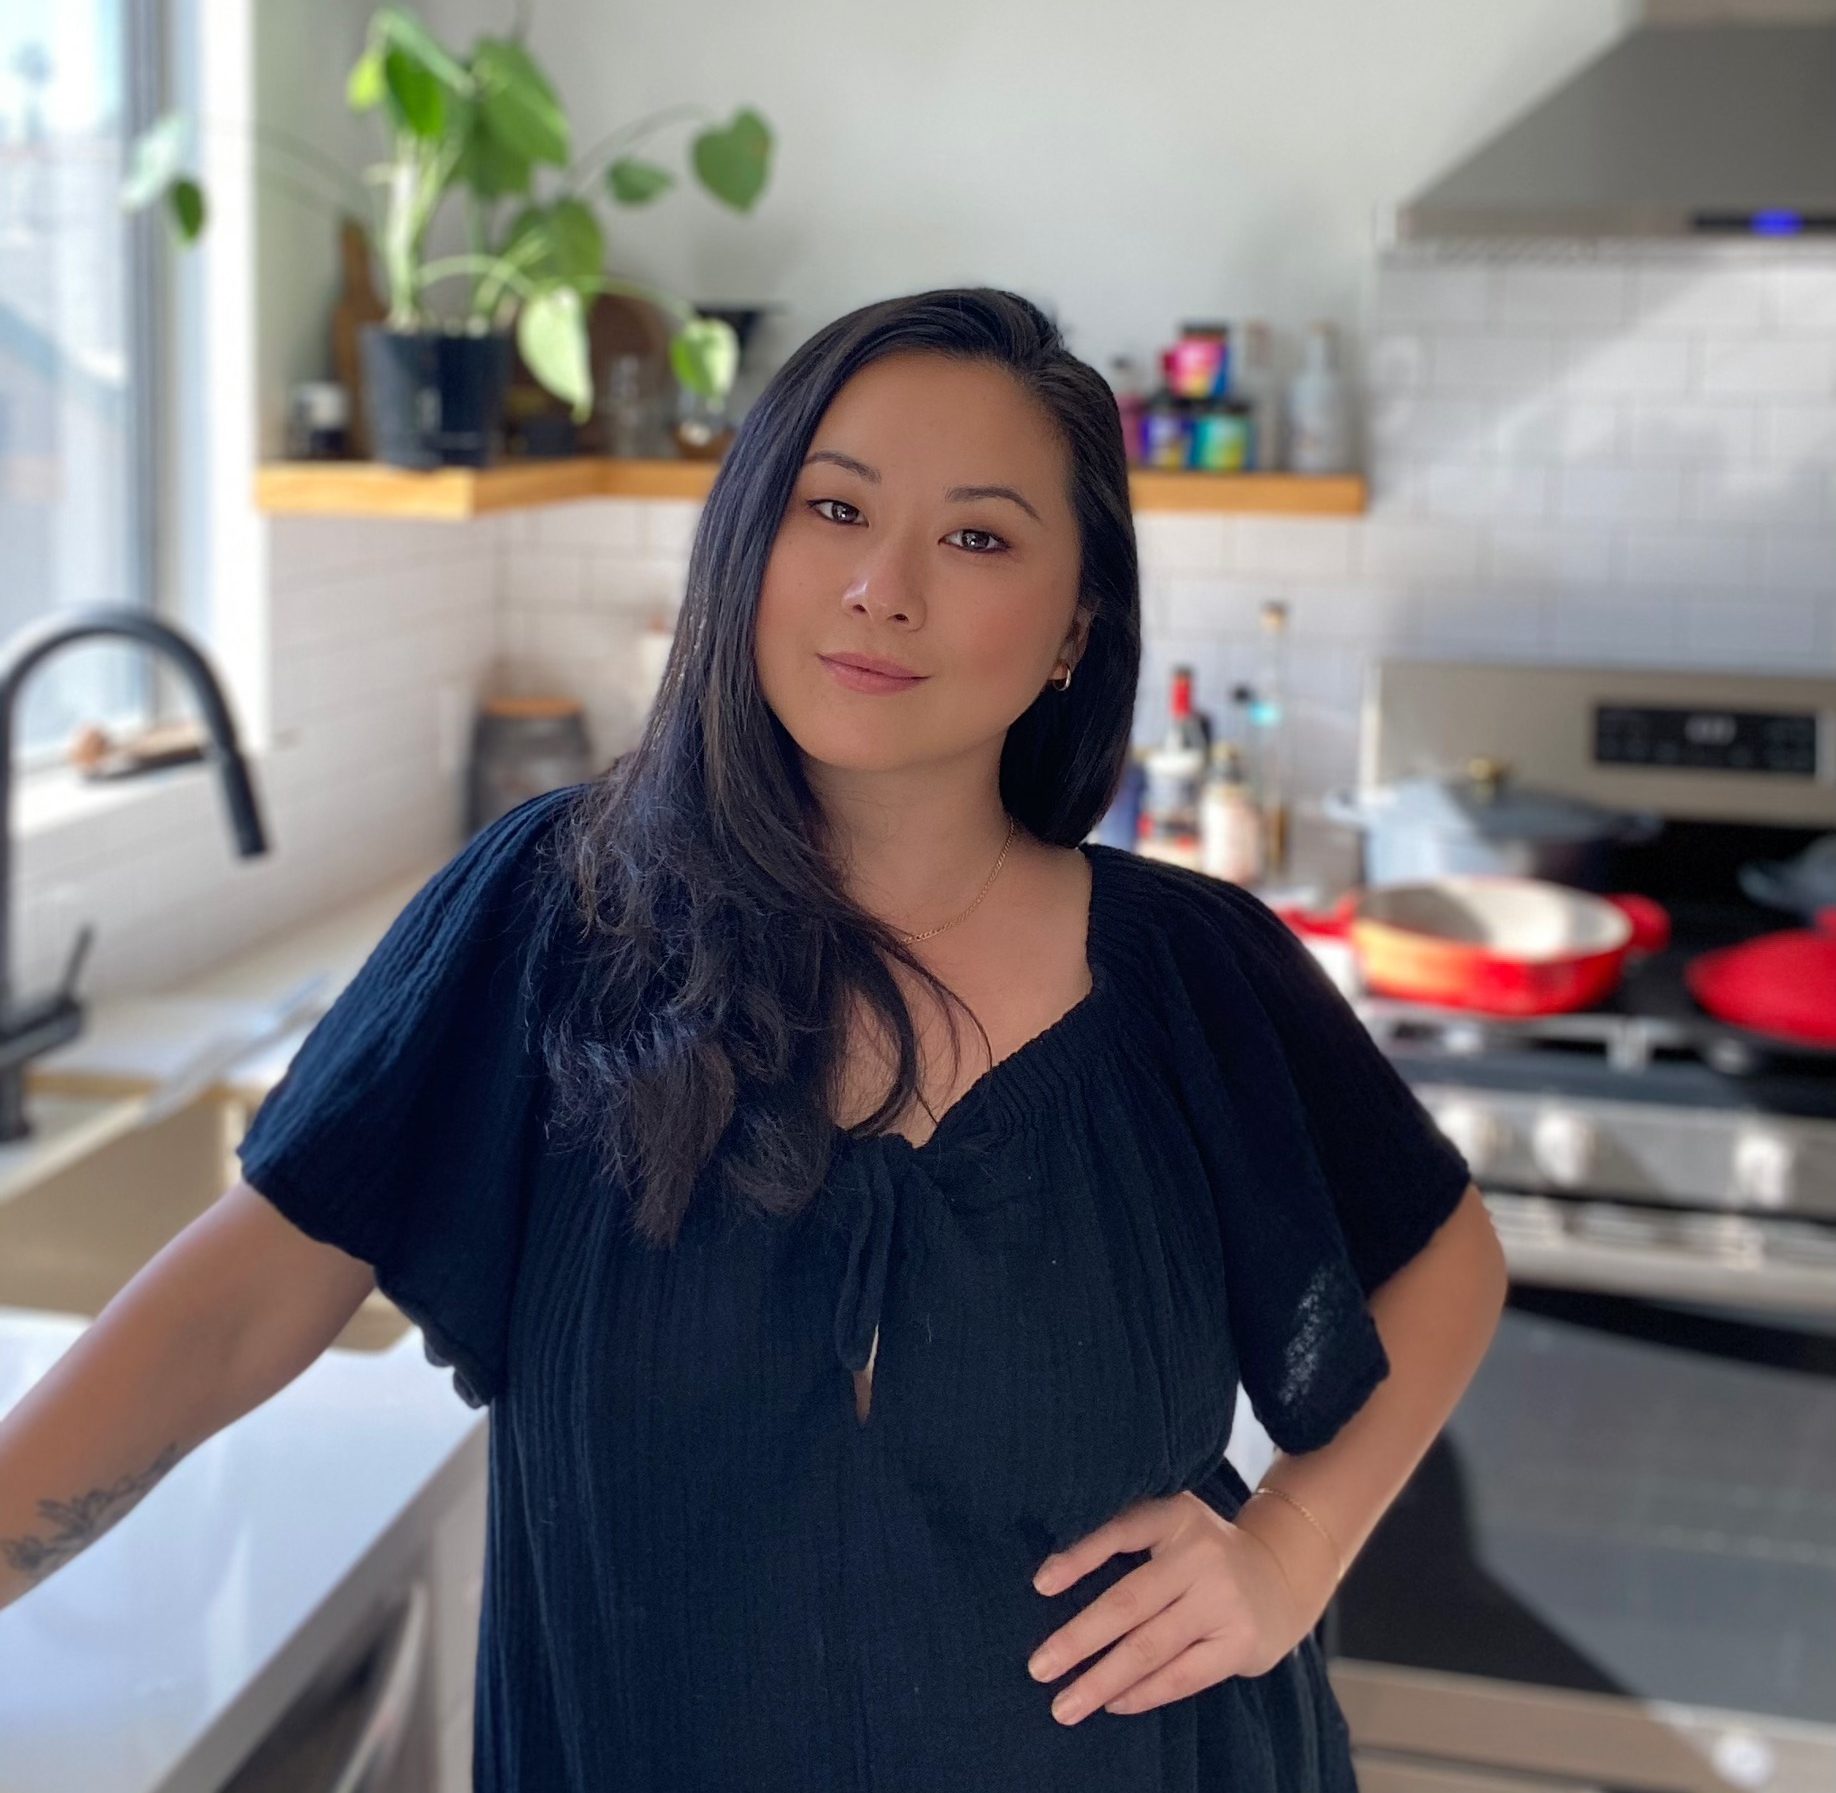 Photograph of Fly by Jing Founder Jing Gao standing in her kitchen